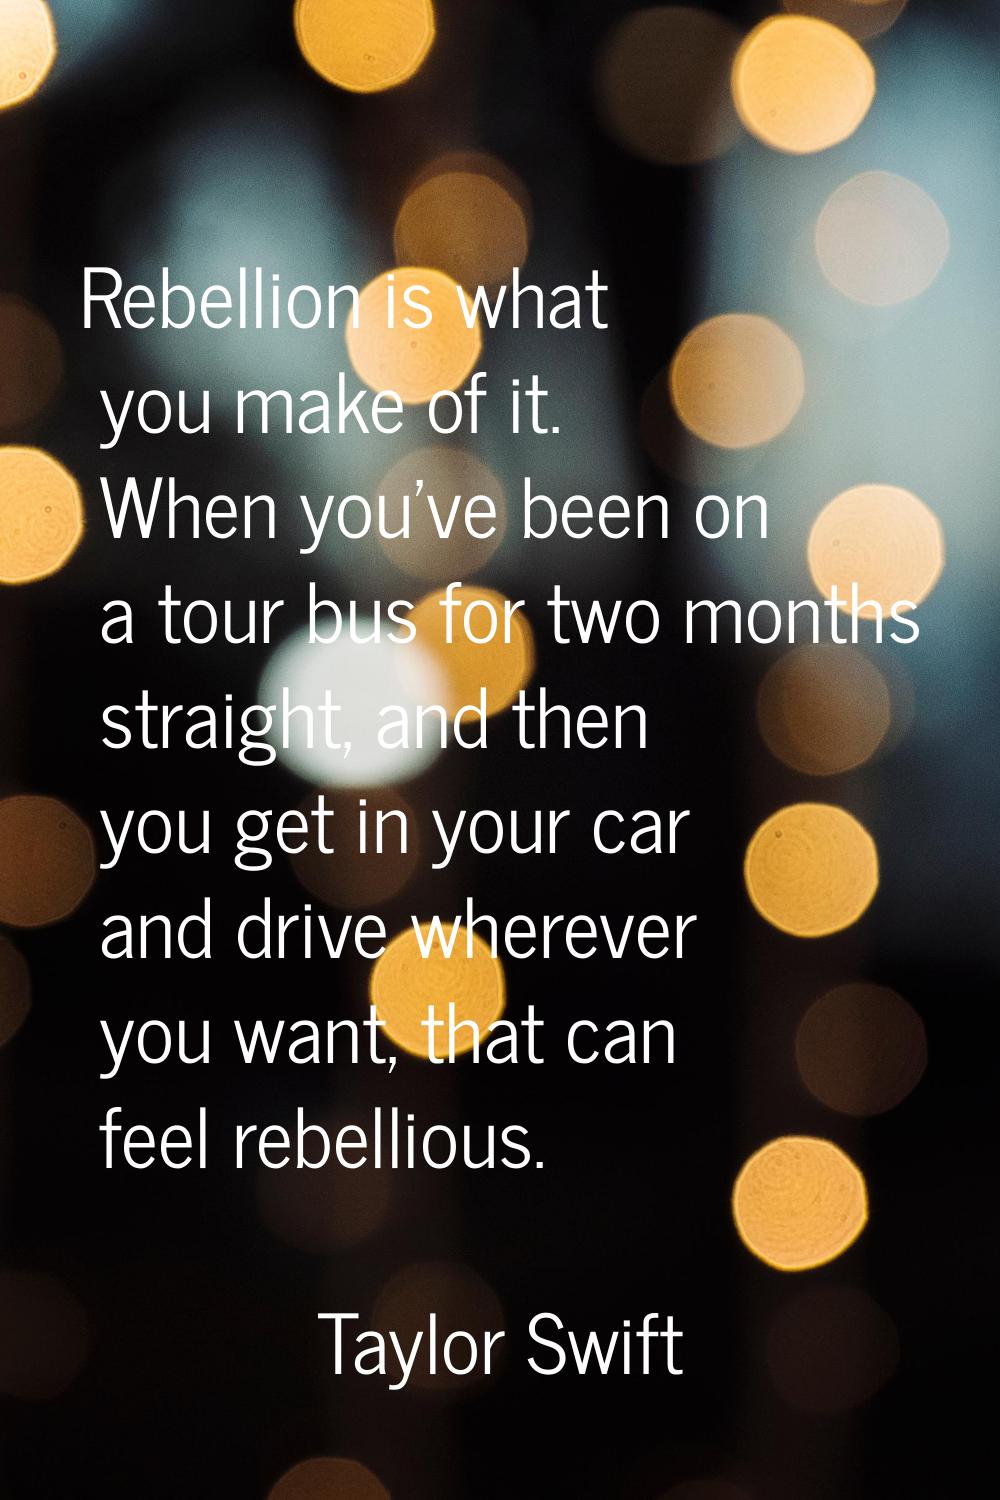 Rebellion is what you make of it. When you've been on a tour bus for two months straight, and then 